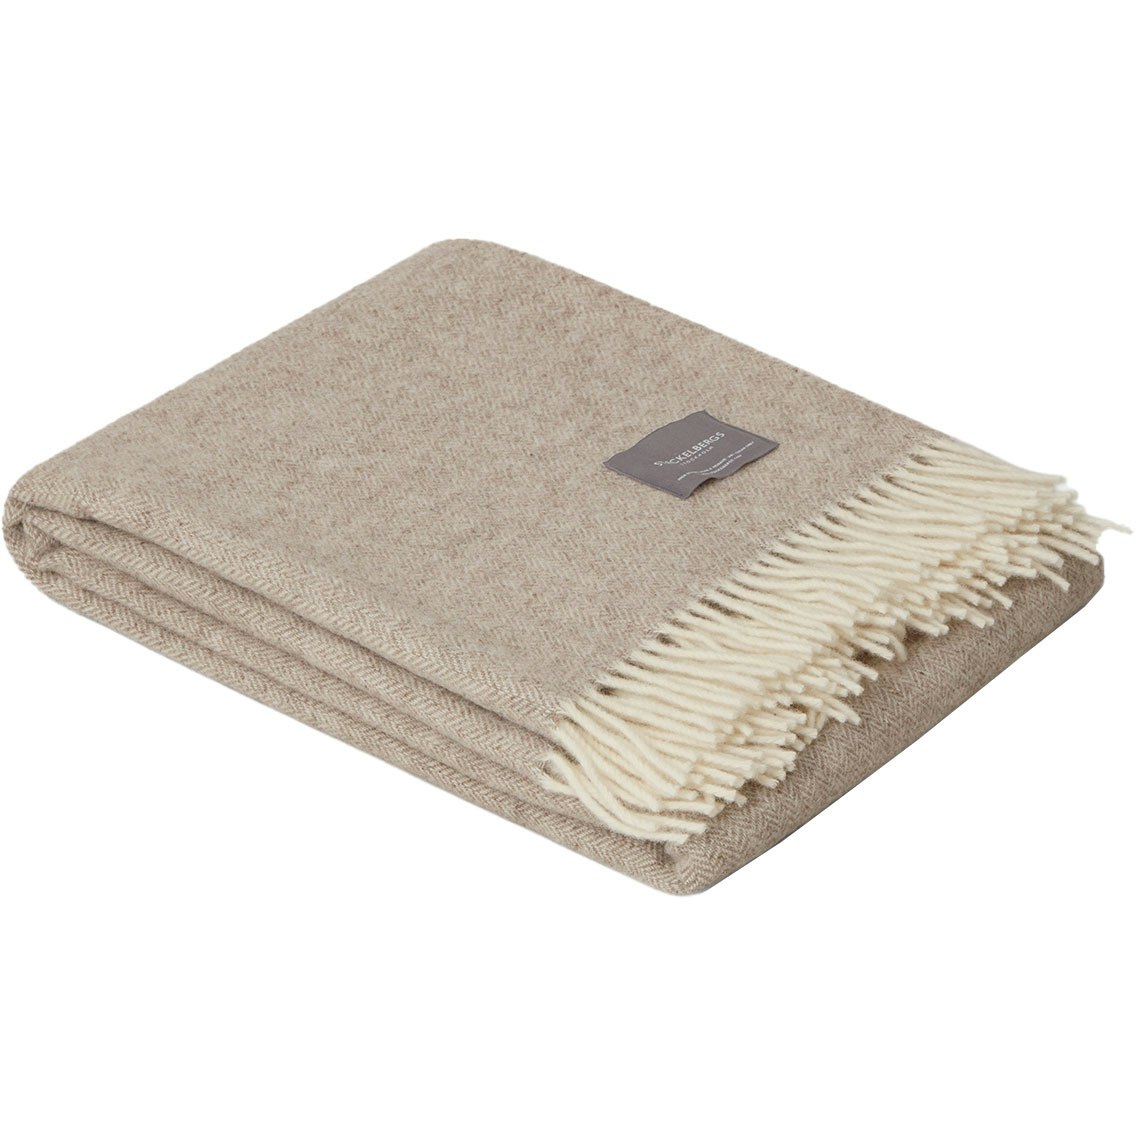 Wool Fishbone Teppe 130x170 cm, Lys Taupe/Off-white